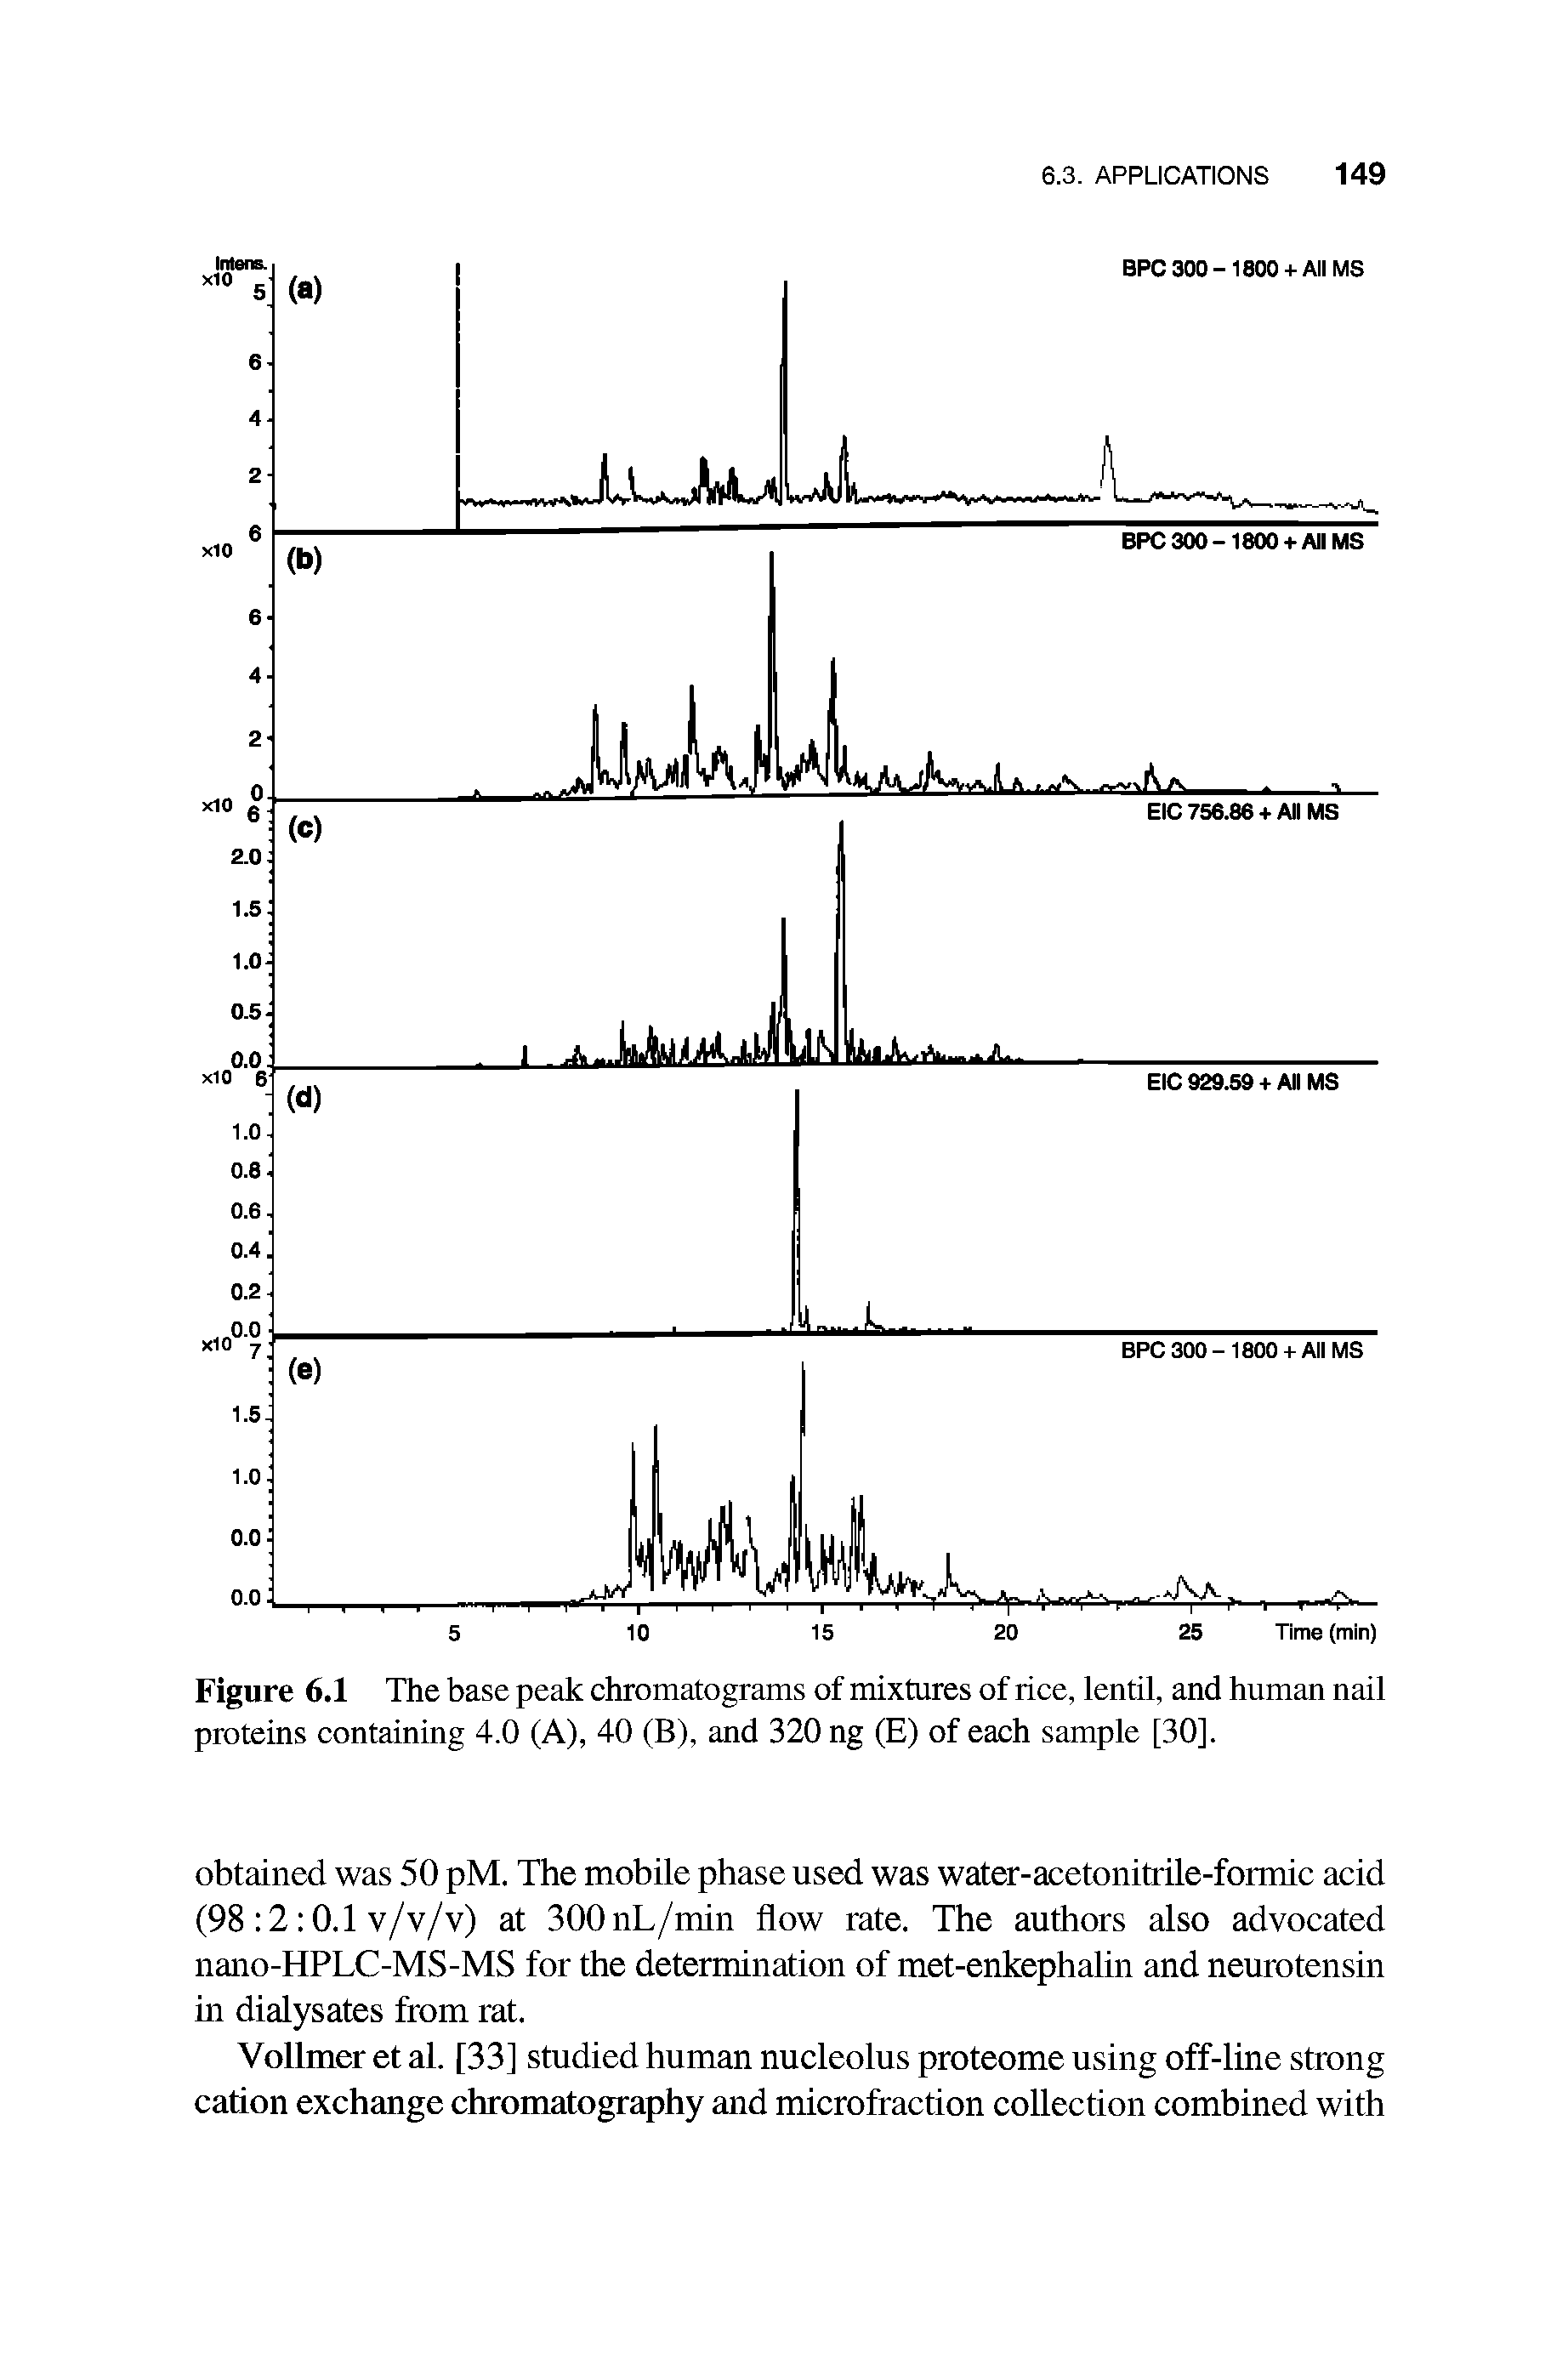 Figure 6.1 The base peak chromatograms of mixtures of rice, lentil, and human nail proteins containing 4.0 (A), 40 (B), and 320 ng (E) of each sample [30].